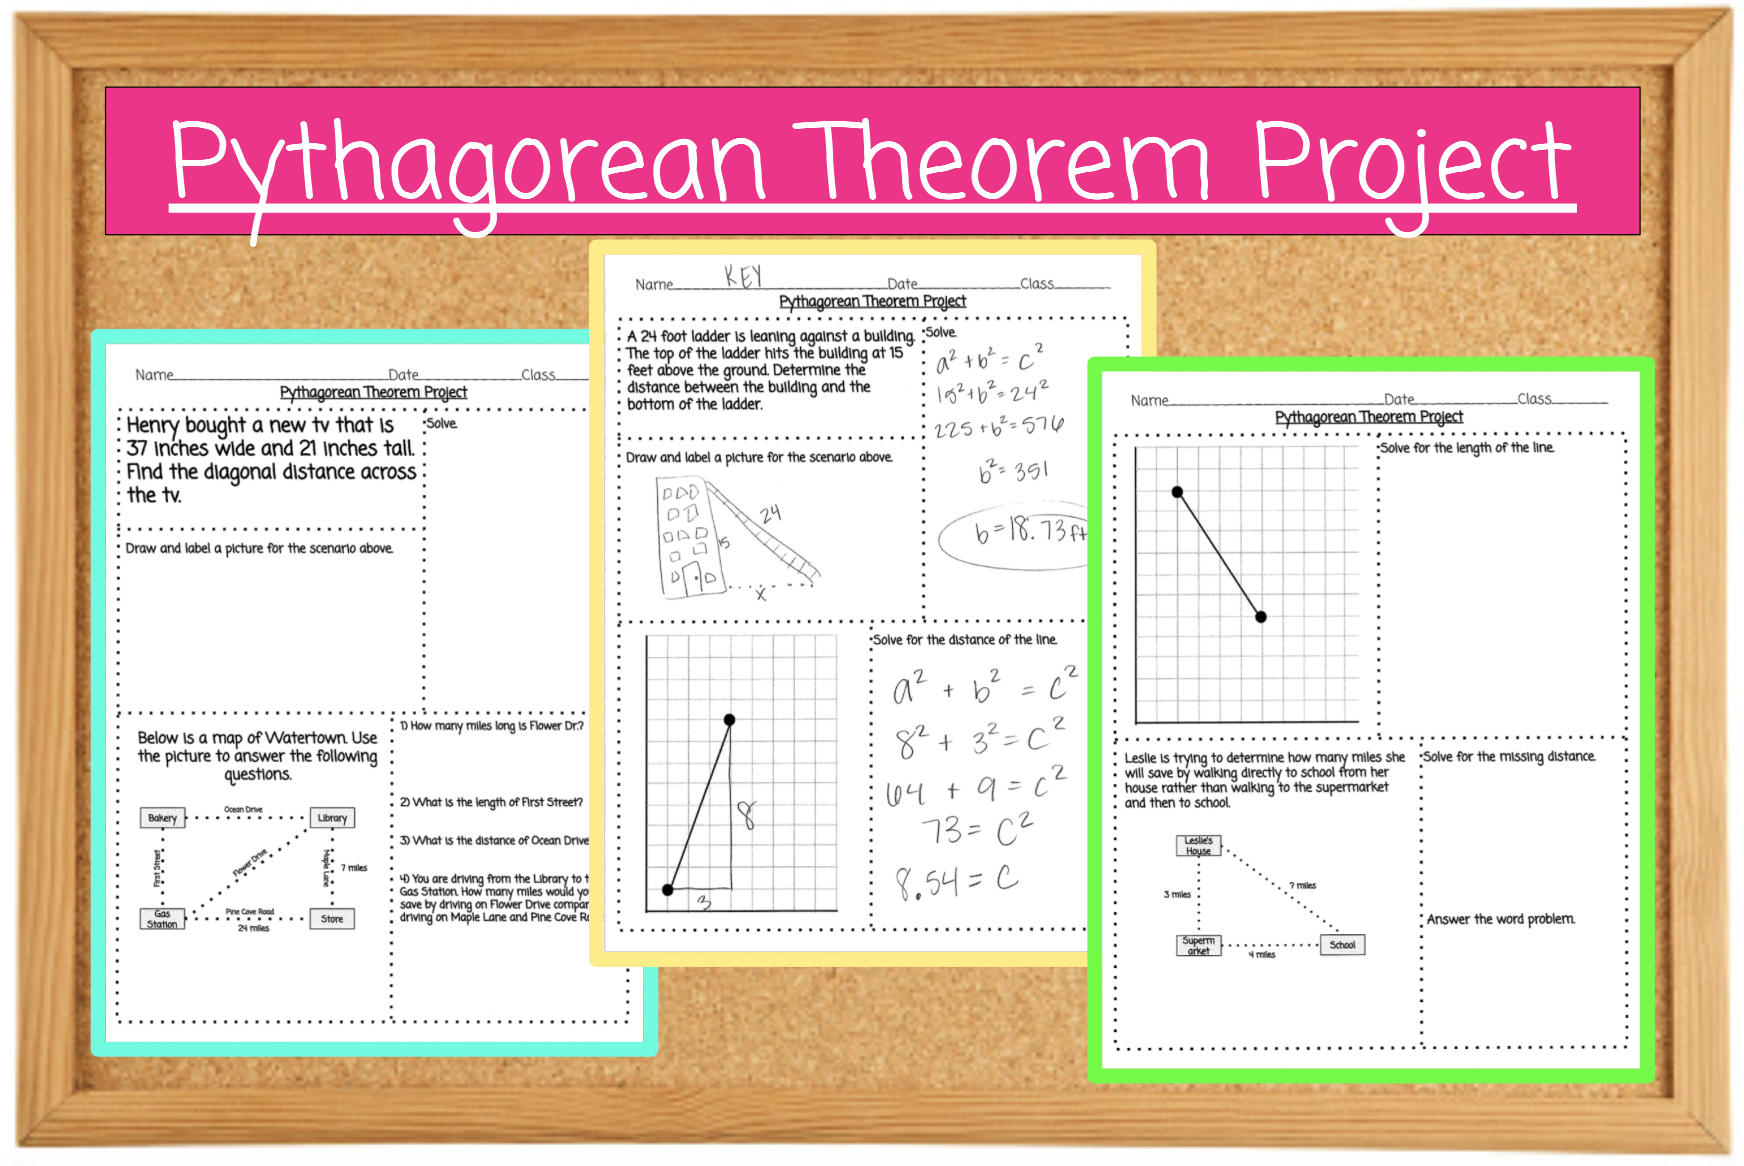 Pythagorean Theorem Project - Word Problems and Drawings